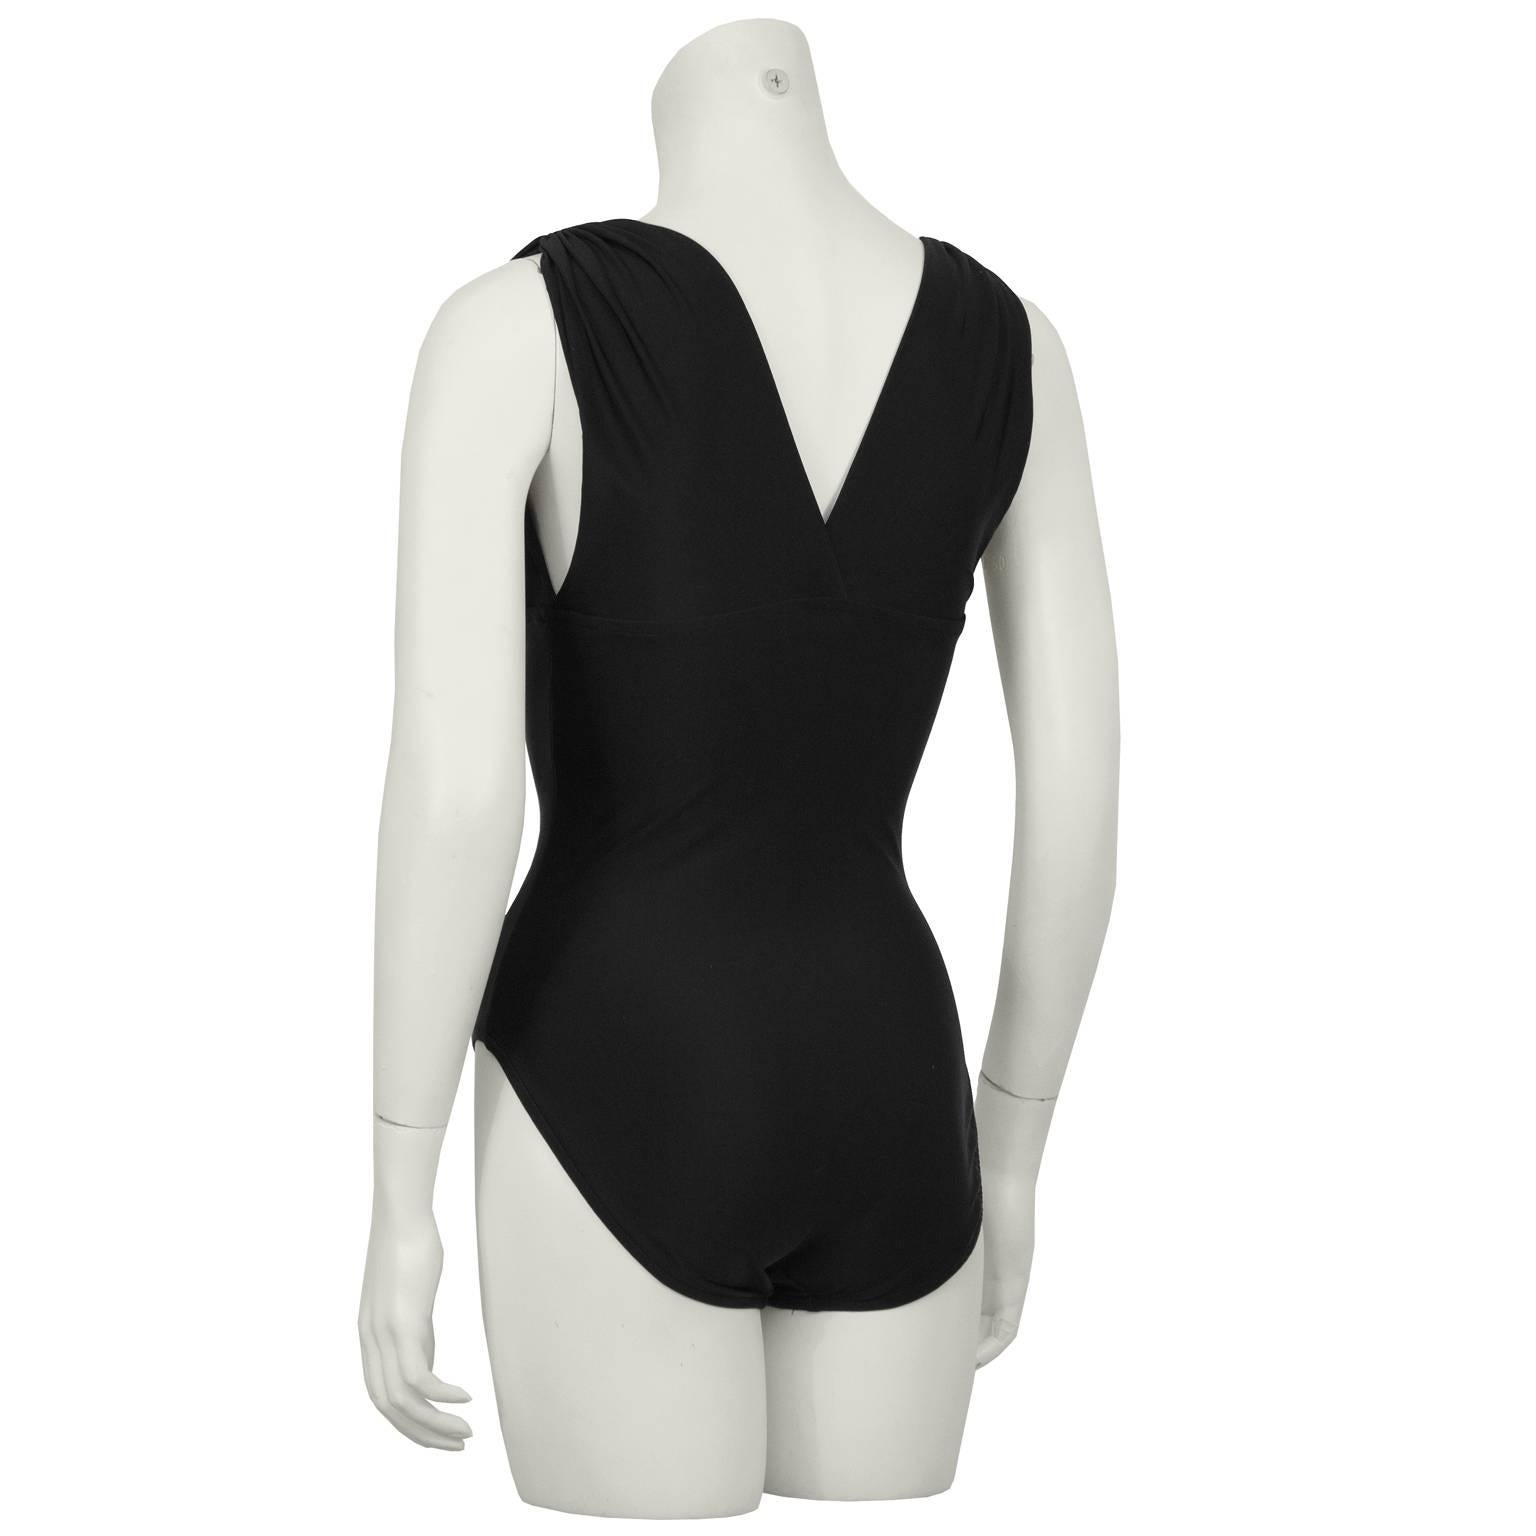 Elegant Bill Blass one piece black bathing suit from the 1980's. The Lycra spandex and nylon blend bathing suit has a flattering V neckline in the back and the front that extends up to the wide gathered shoulder. In excellent condition. Fits like a